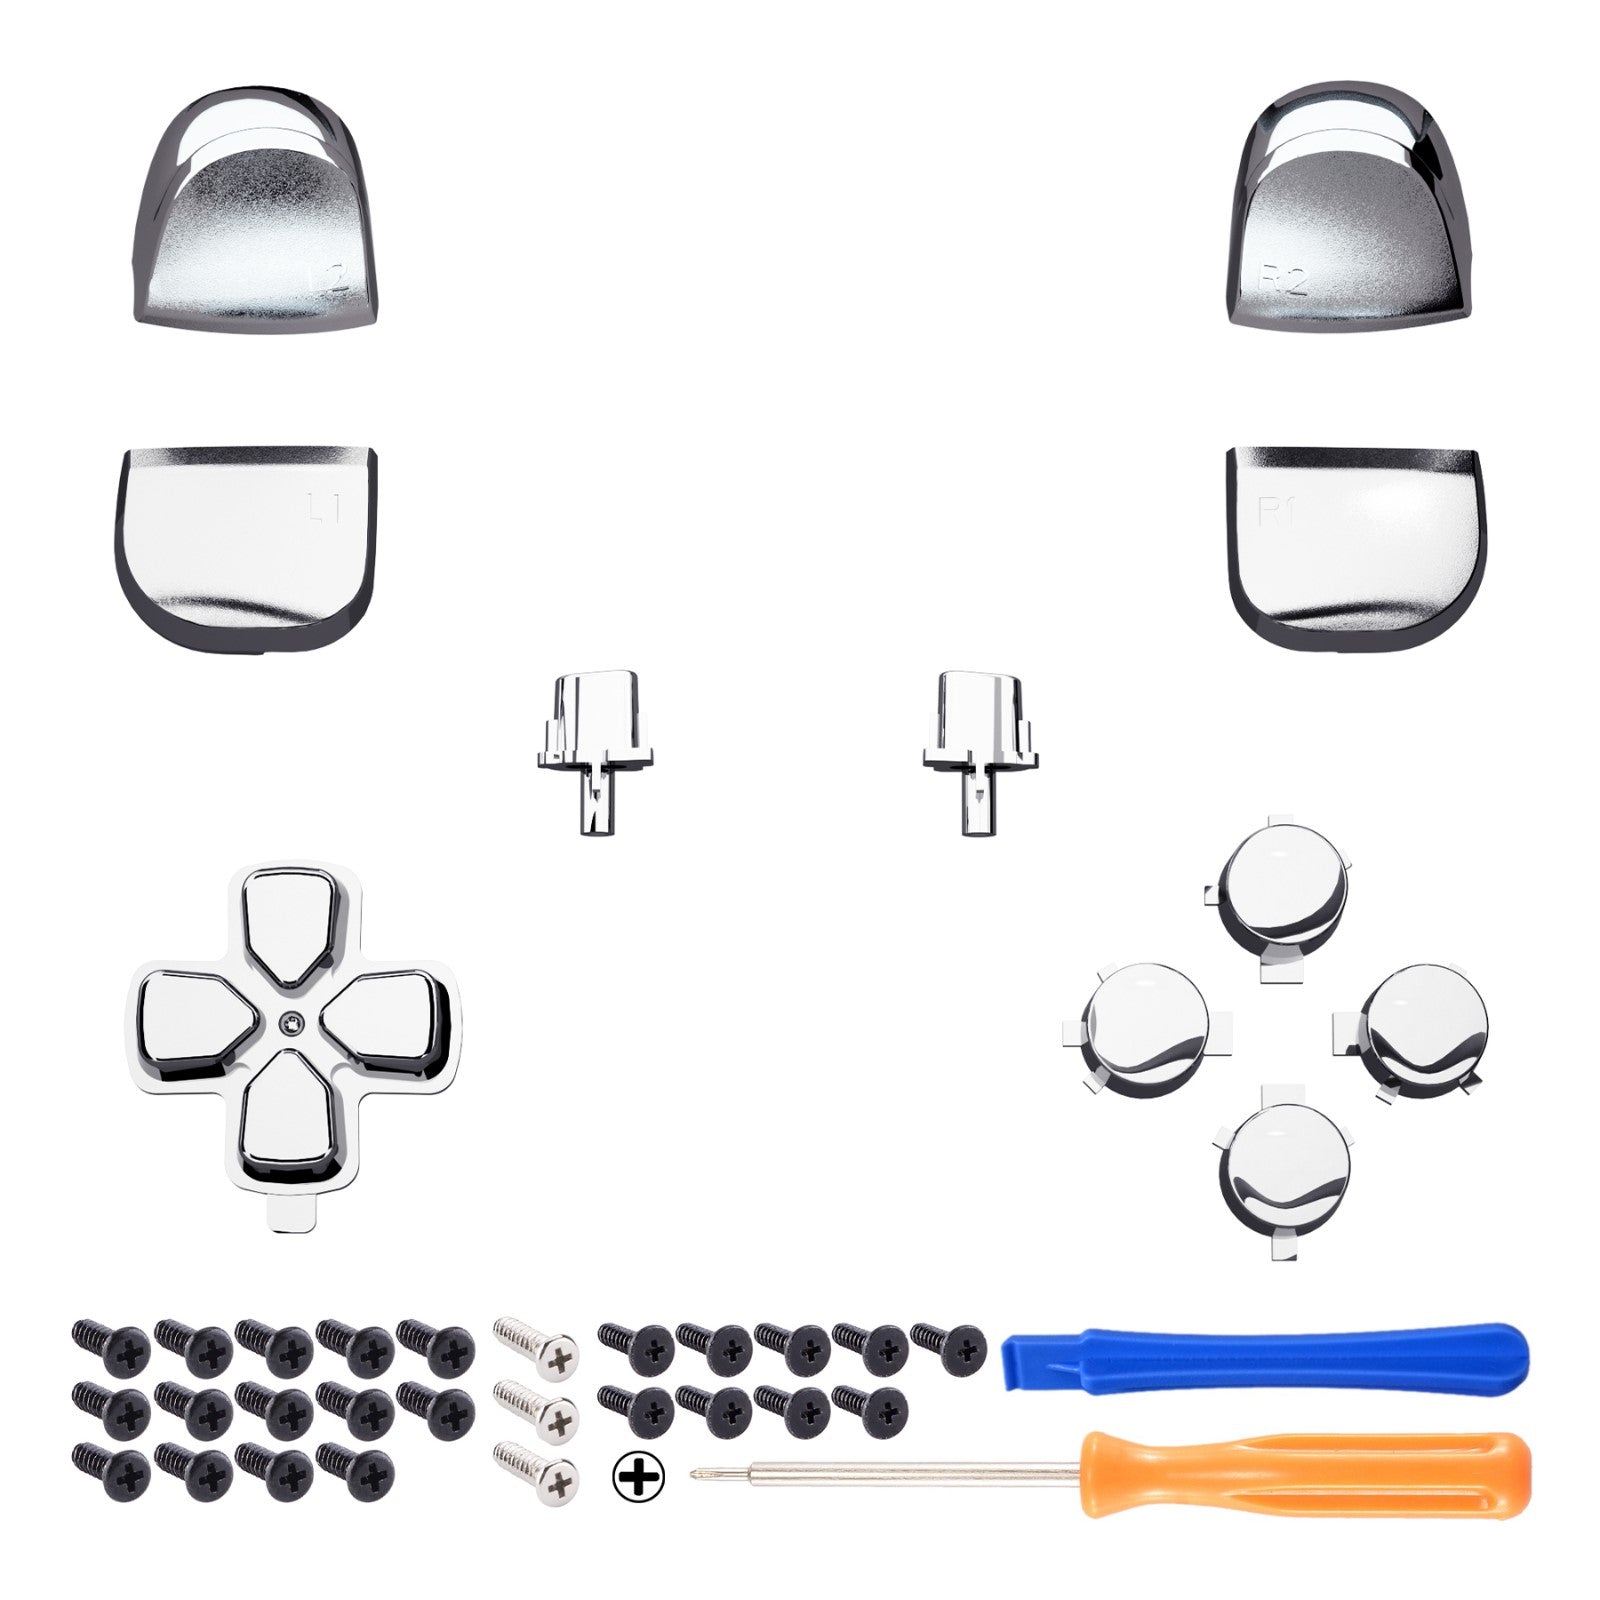 eXtremeRate Retail Replacement D-pad R1 L1 R2 L2 Triggers Share Options Face Buttons, Chrome Silver Full Set Buttons Compatible With ps5 Controller BDM-010 & BDM-020 - JPF2002G2